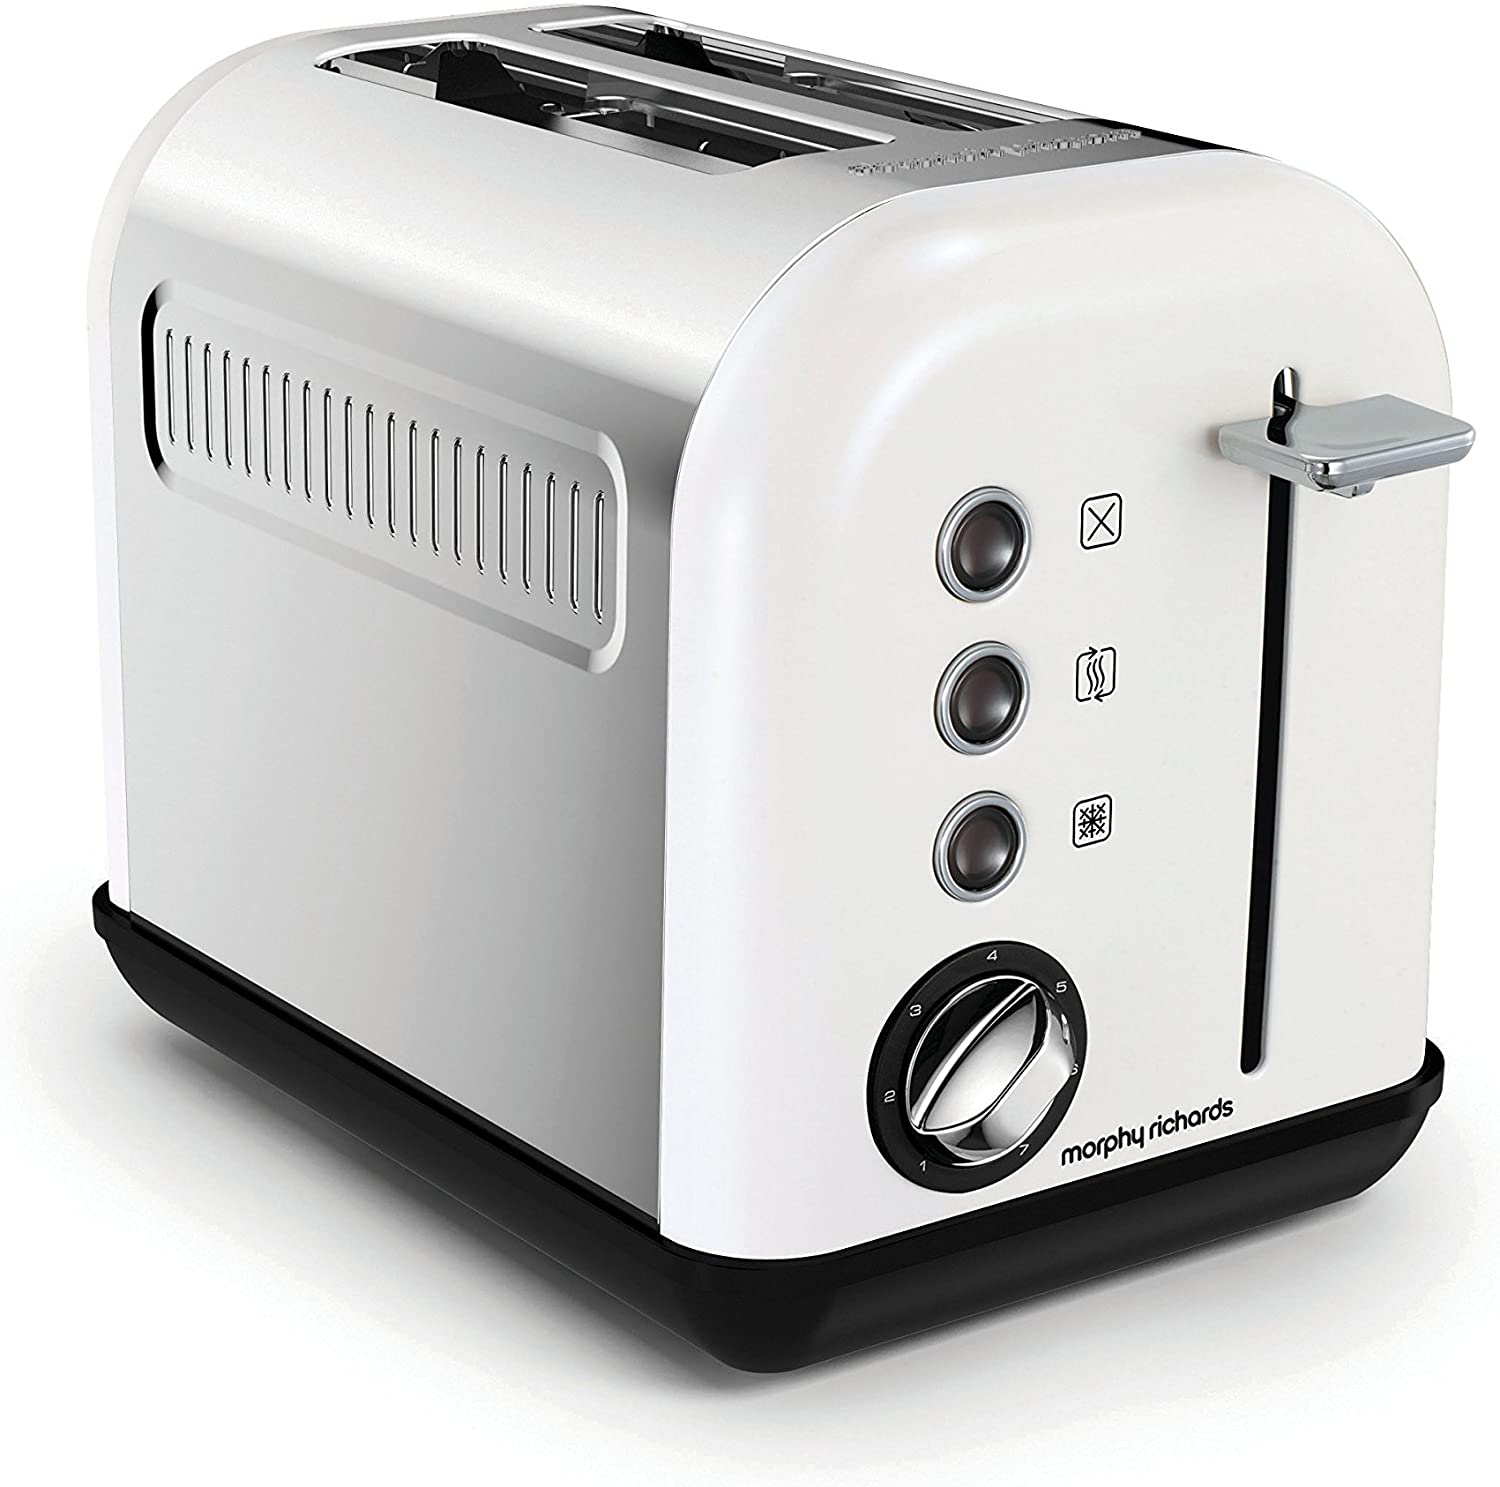 Morphy Richards 222004 Accents Special Edition Toaster 222003 Sand Colours, Stainless Steel, Beige